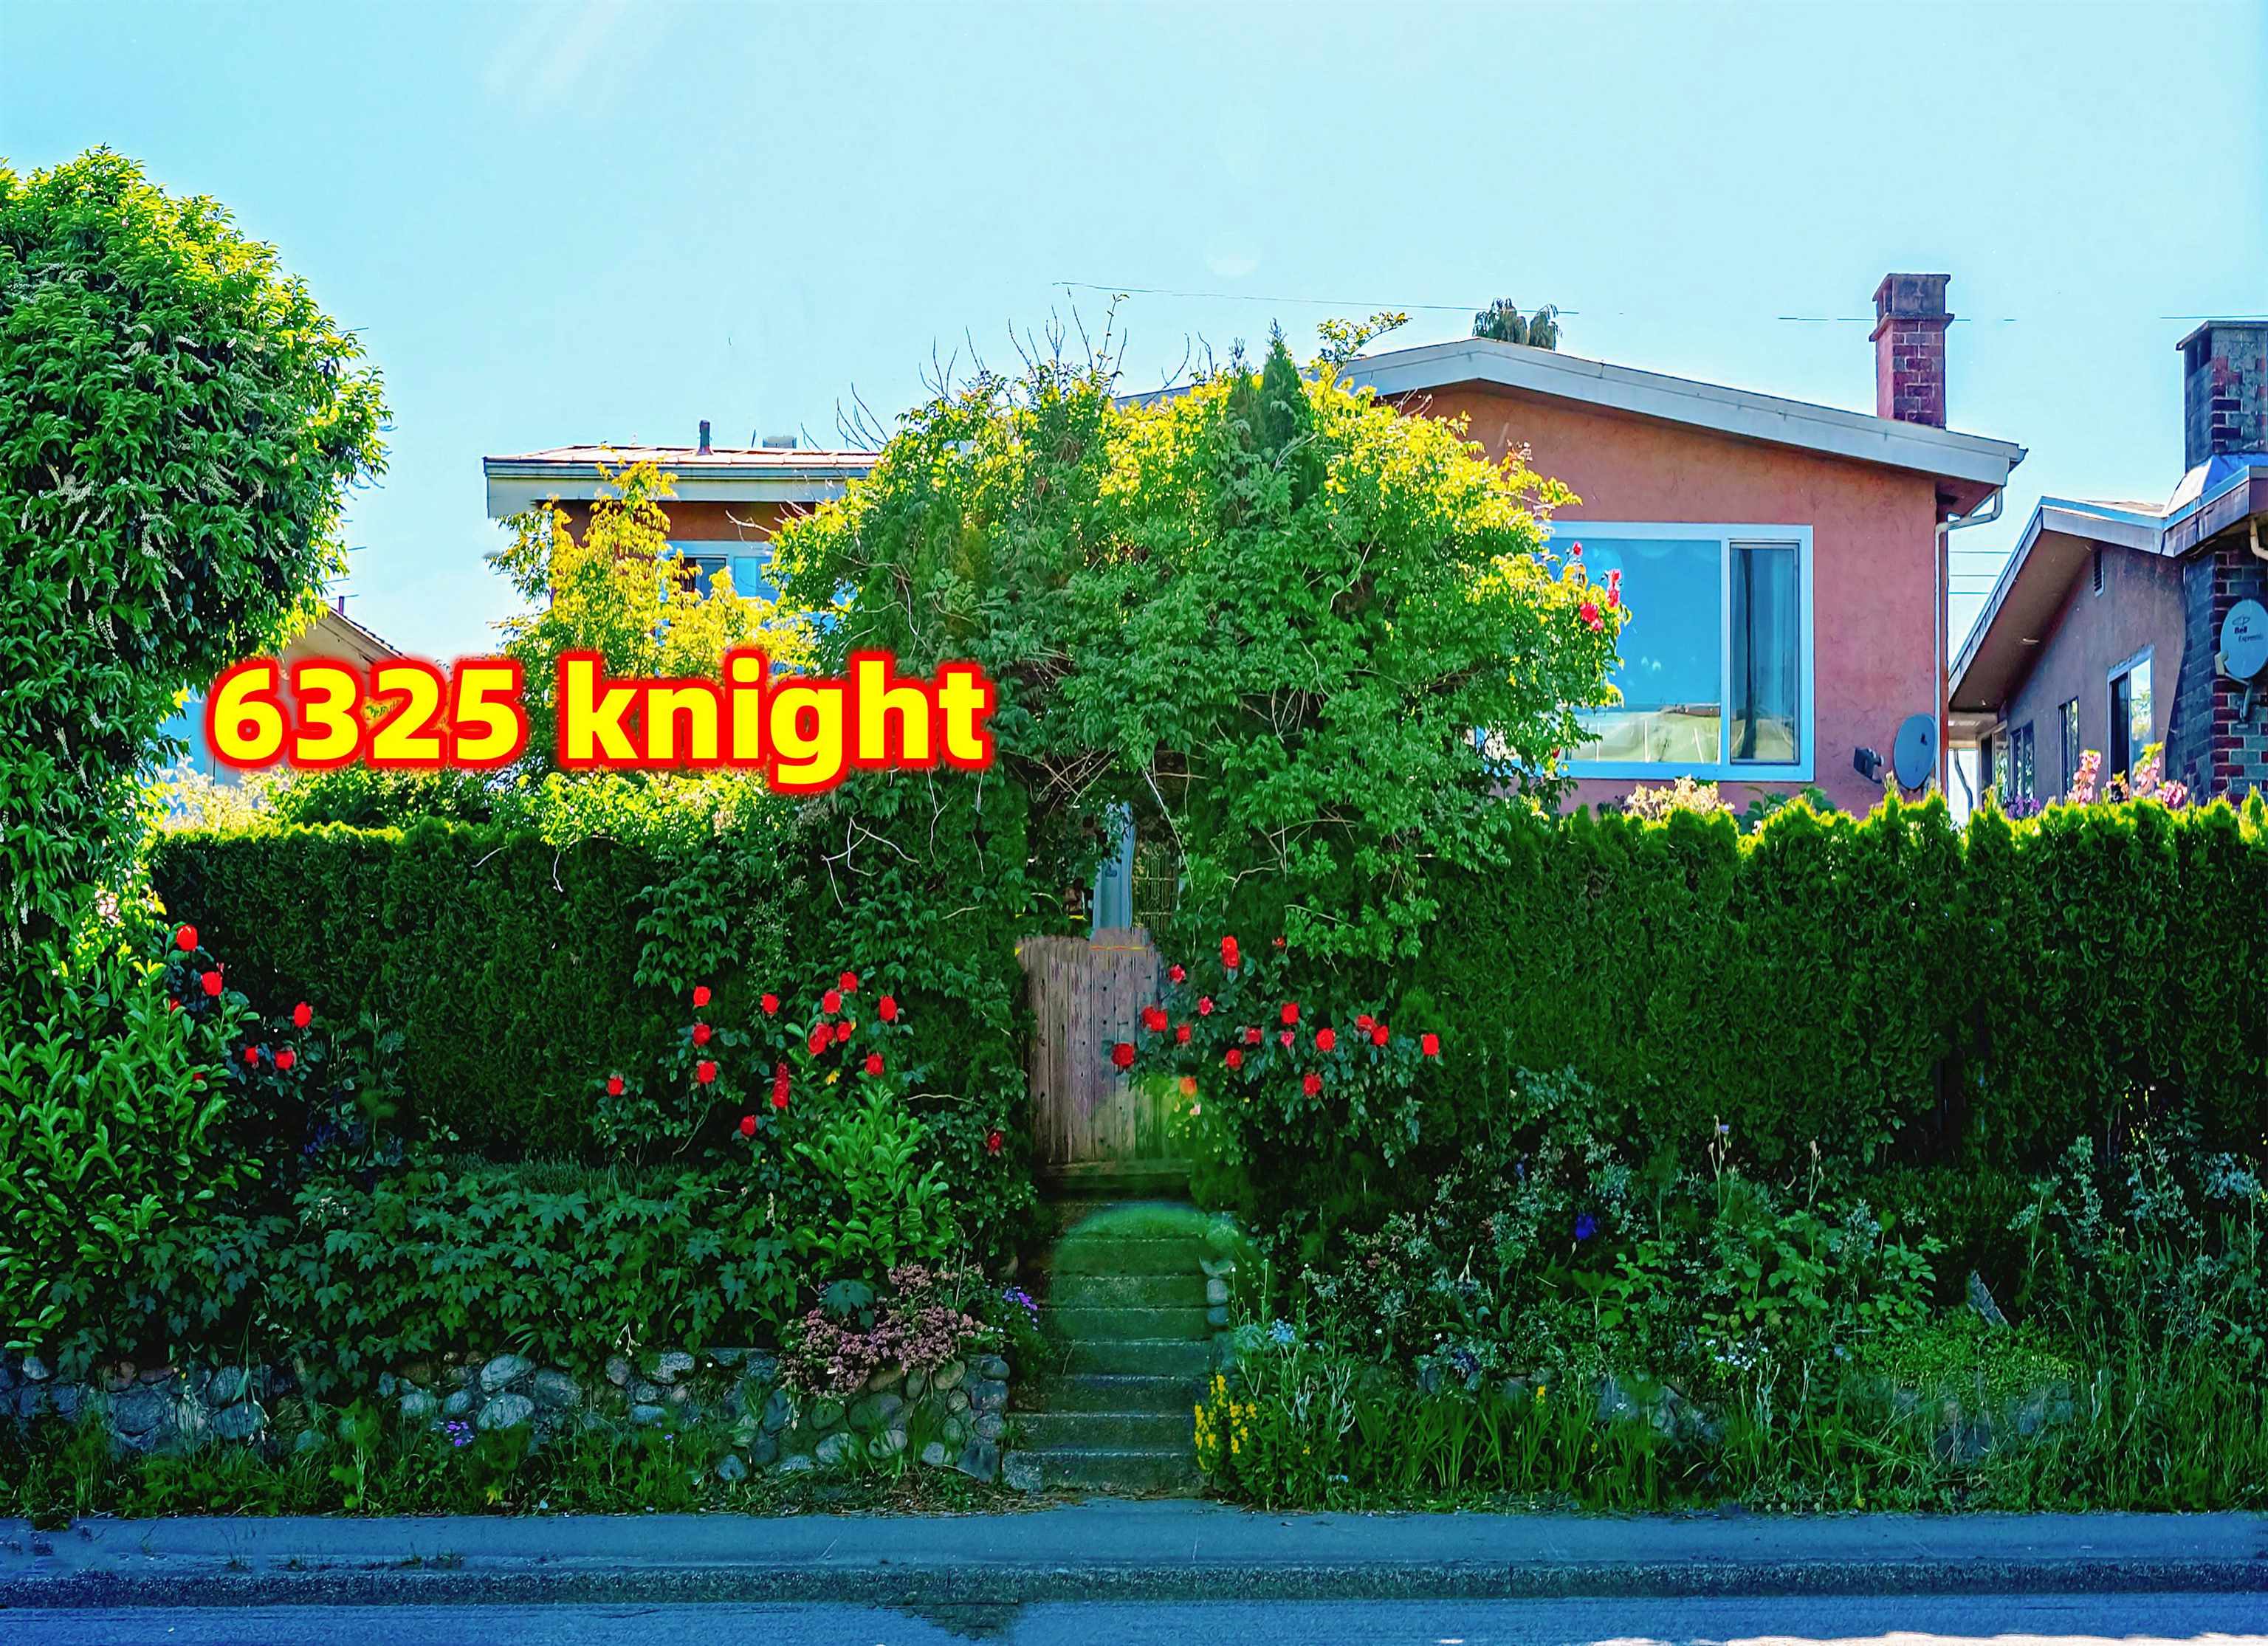 Listing image of 6325 KNIGHT STREET